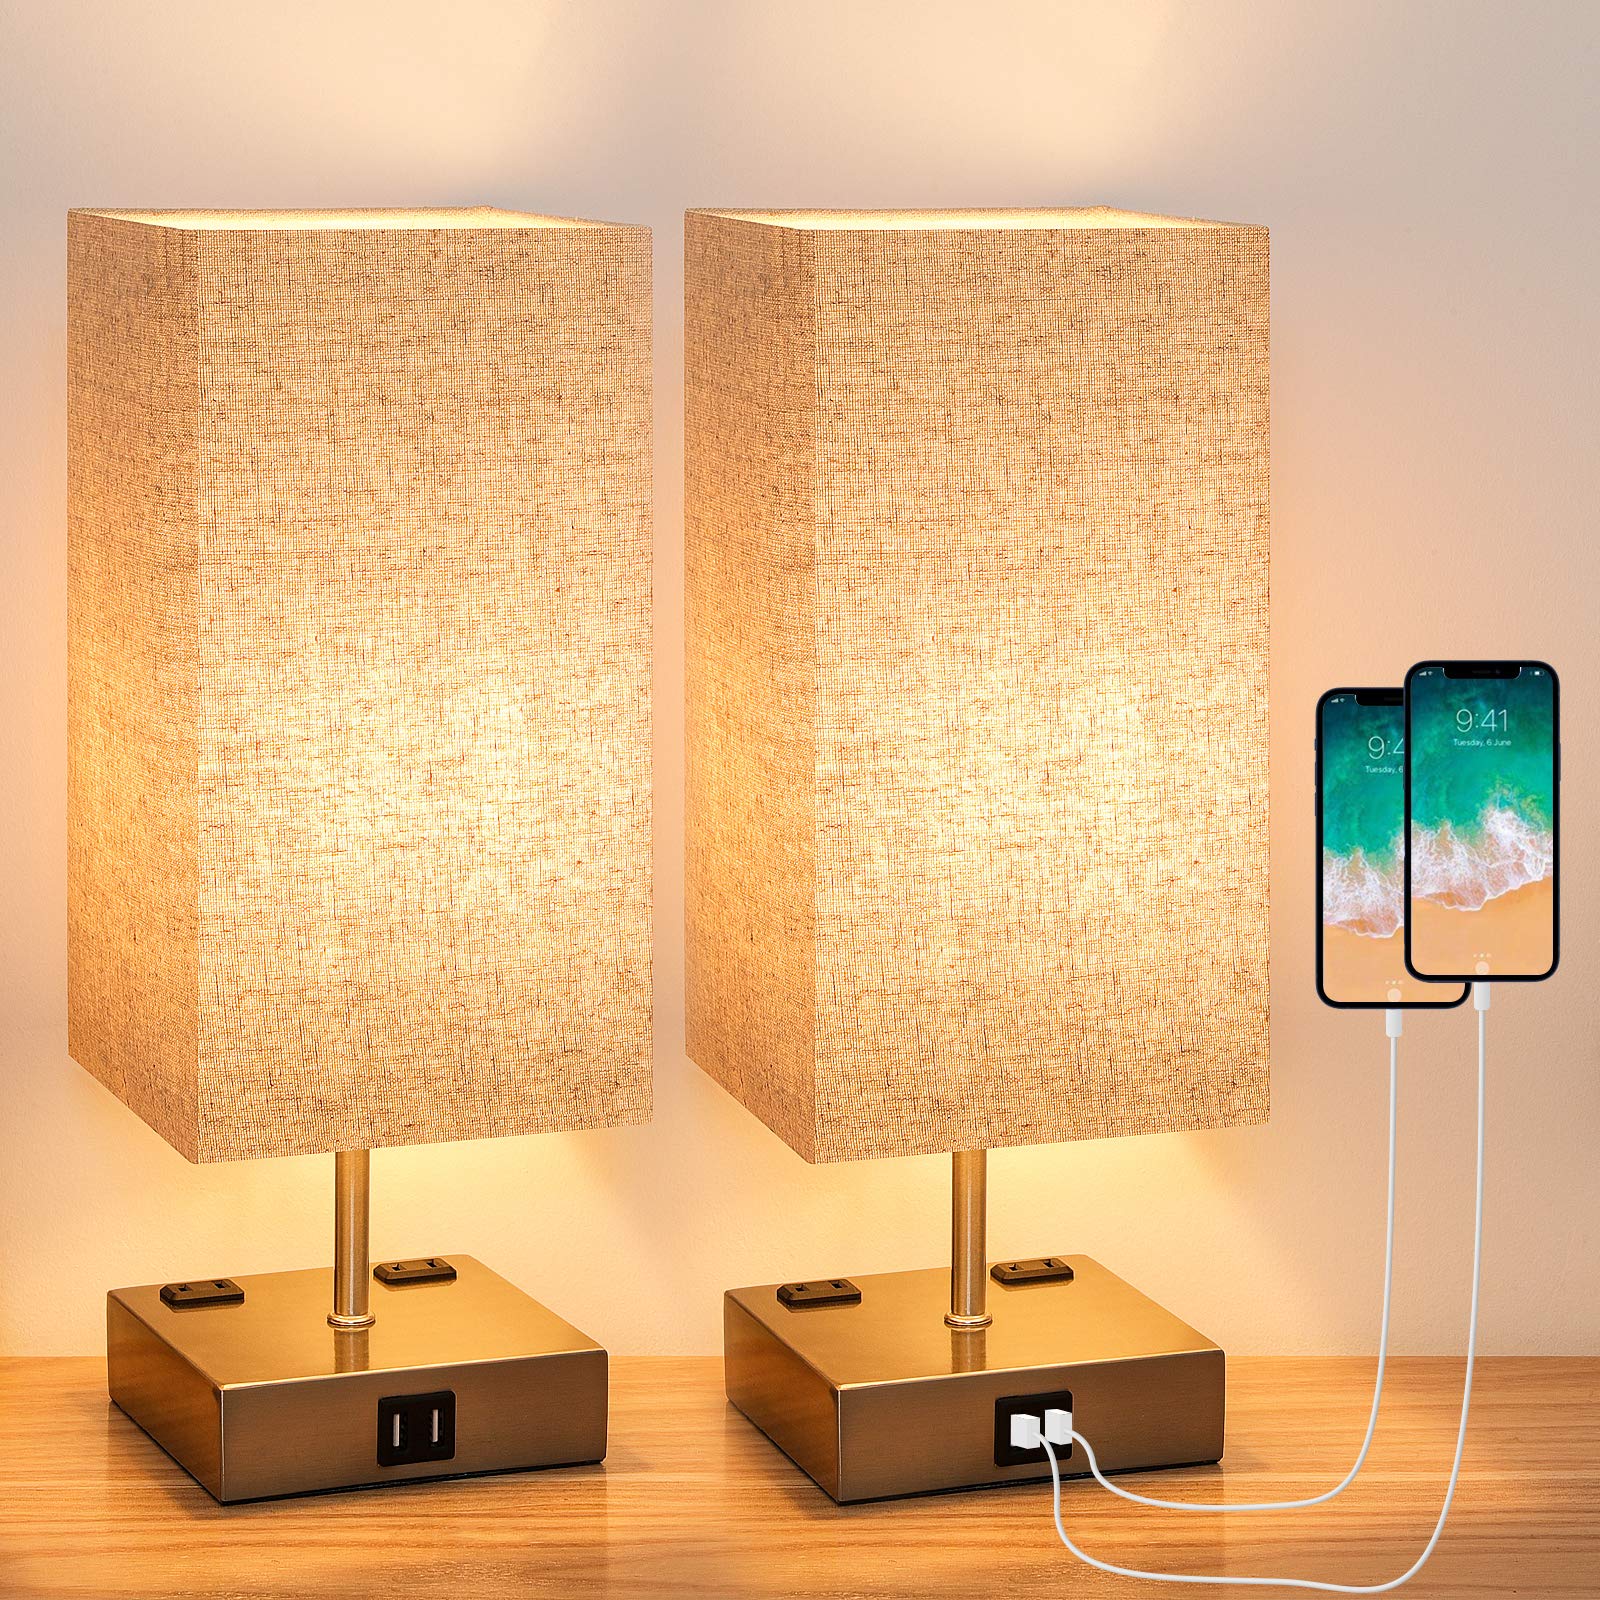 FAGUANGAO Touch Control Table Lamp,3 Way Dimmable Touch Lamps with 2 Fast USB Charging Ports and 2 Ac Outlets,Modern Nightstand Lamp, Ideal for Bed...